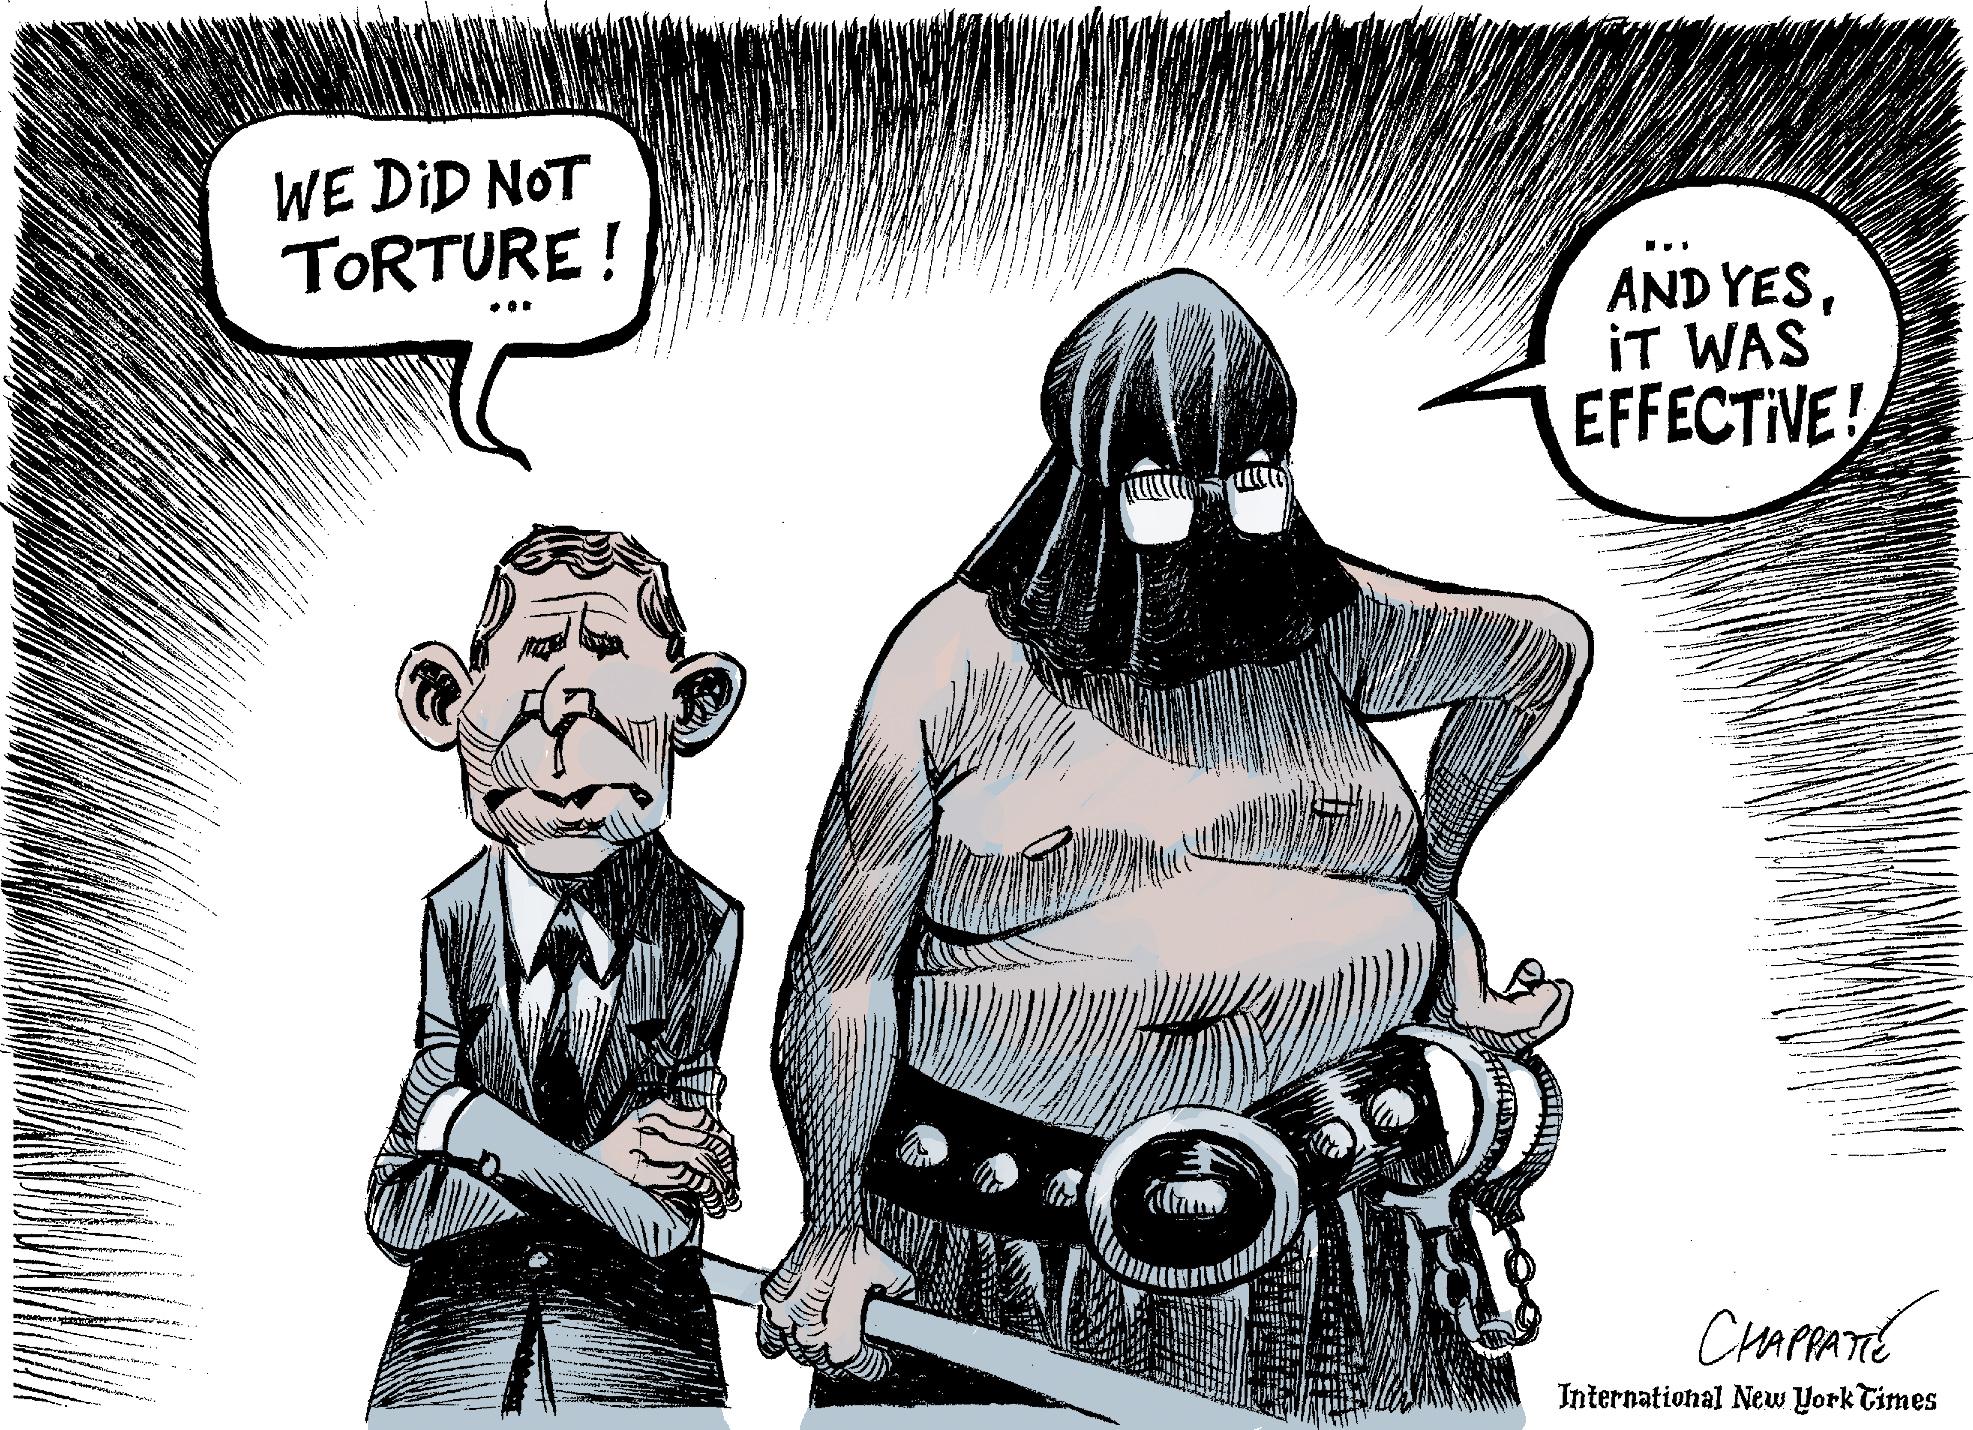 After the torture report